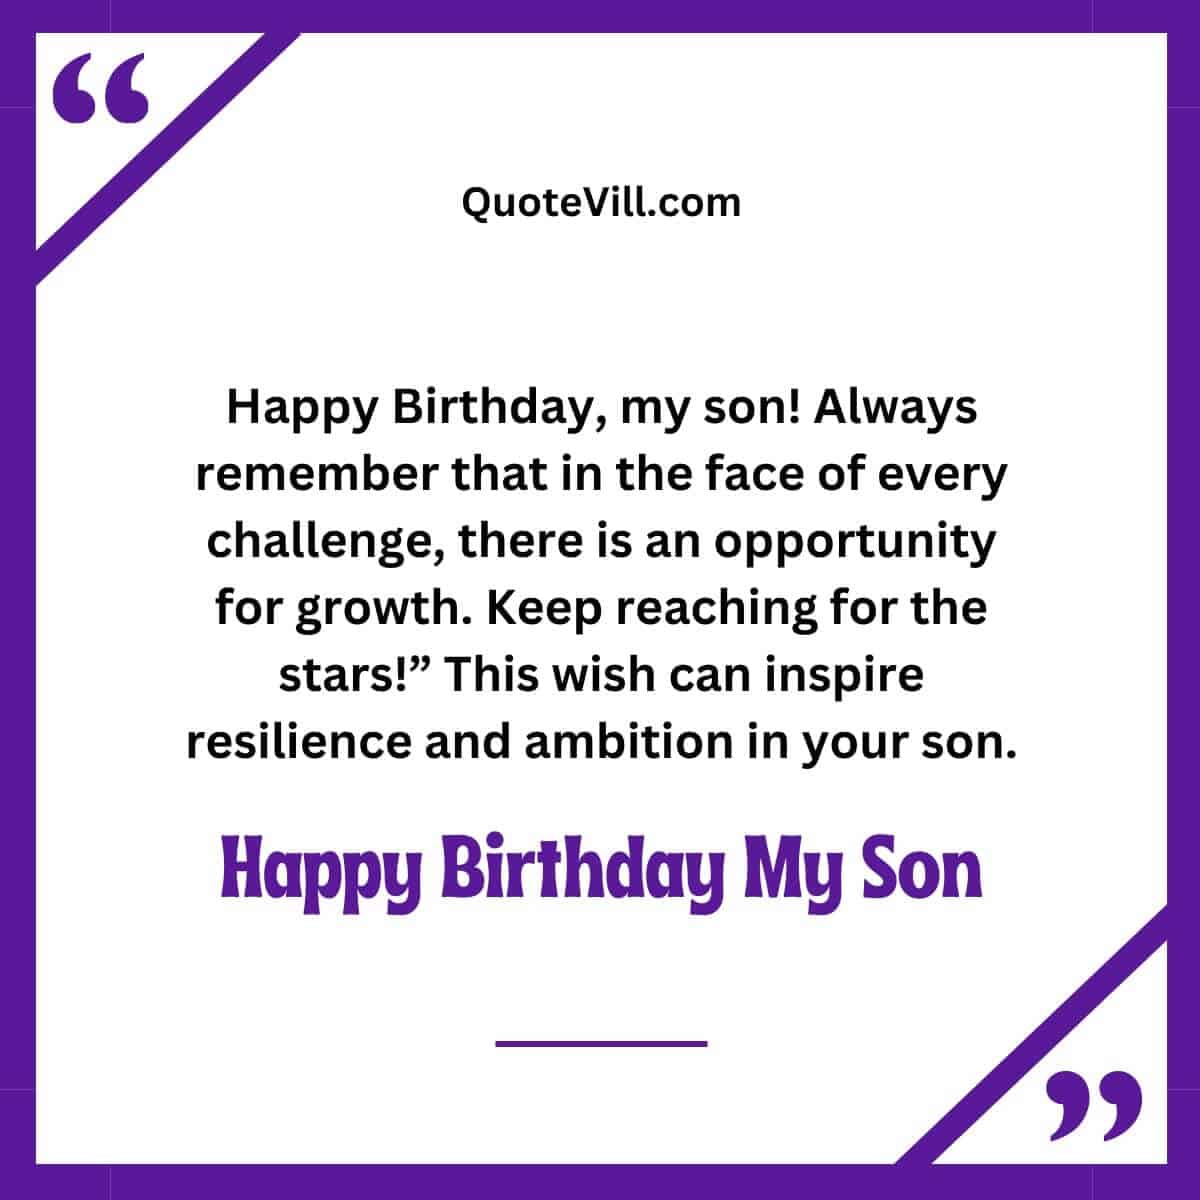 Funny Happy Birthday Wishes for Son from Mom